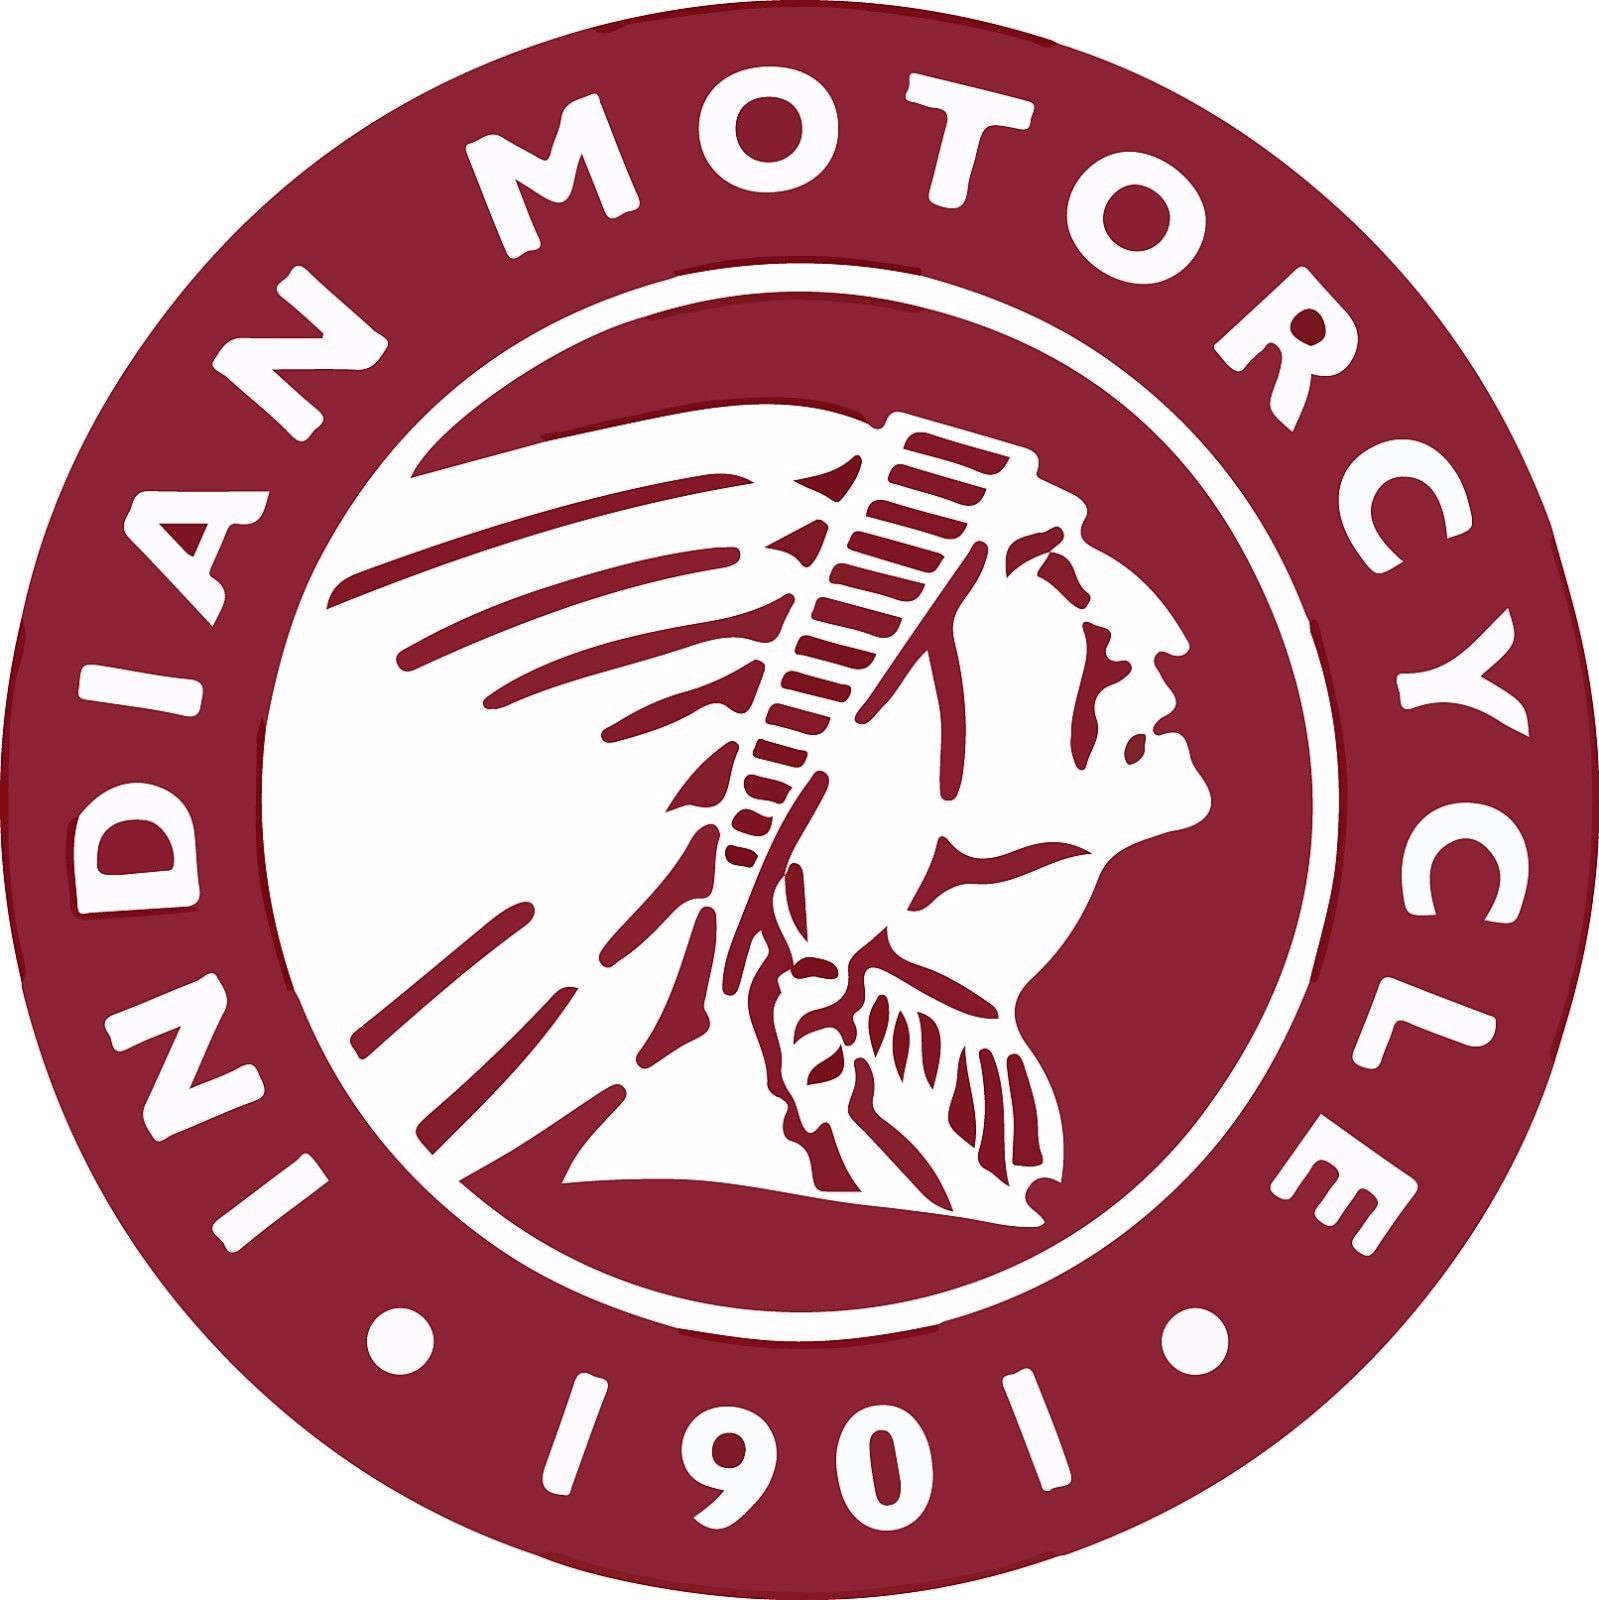 Indian Motorcycle 1901 Precision Cut Decal - $3.46 - $11.95